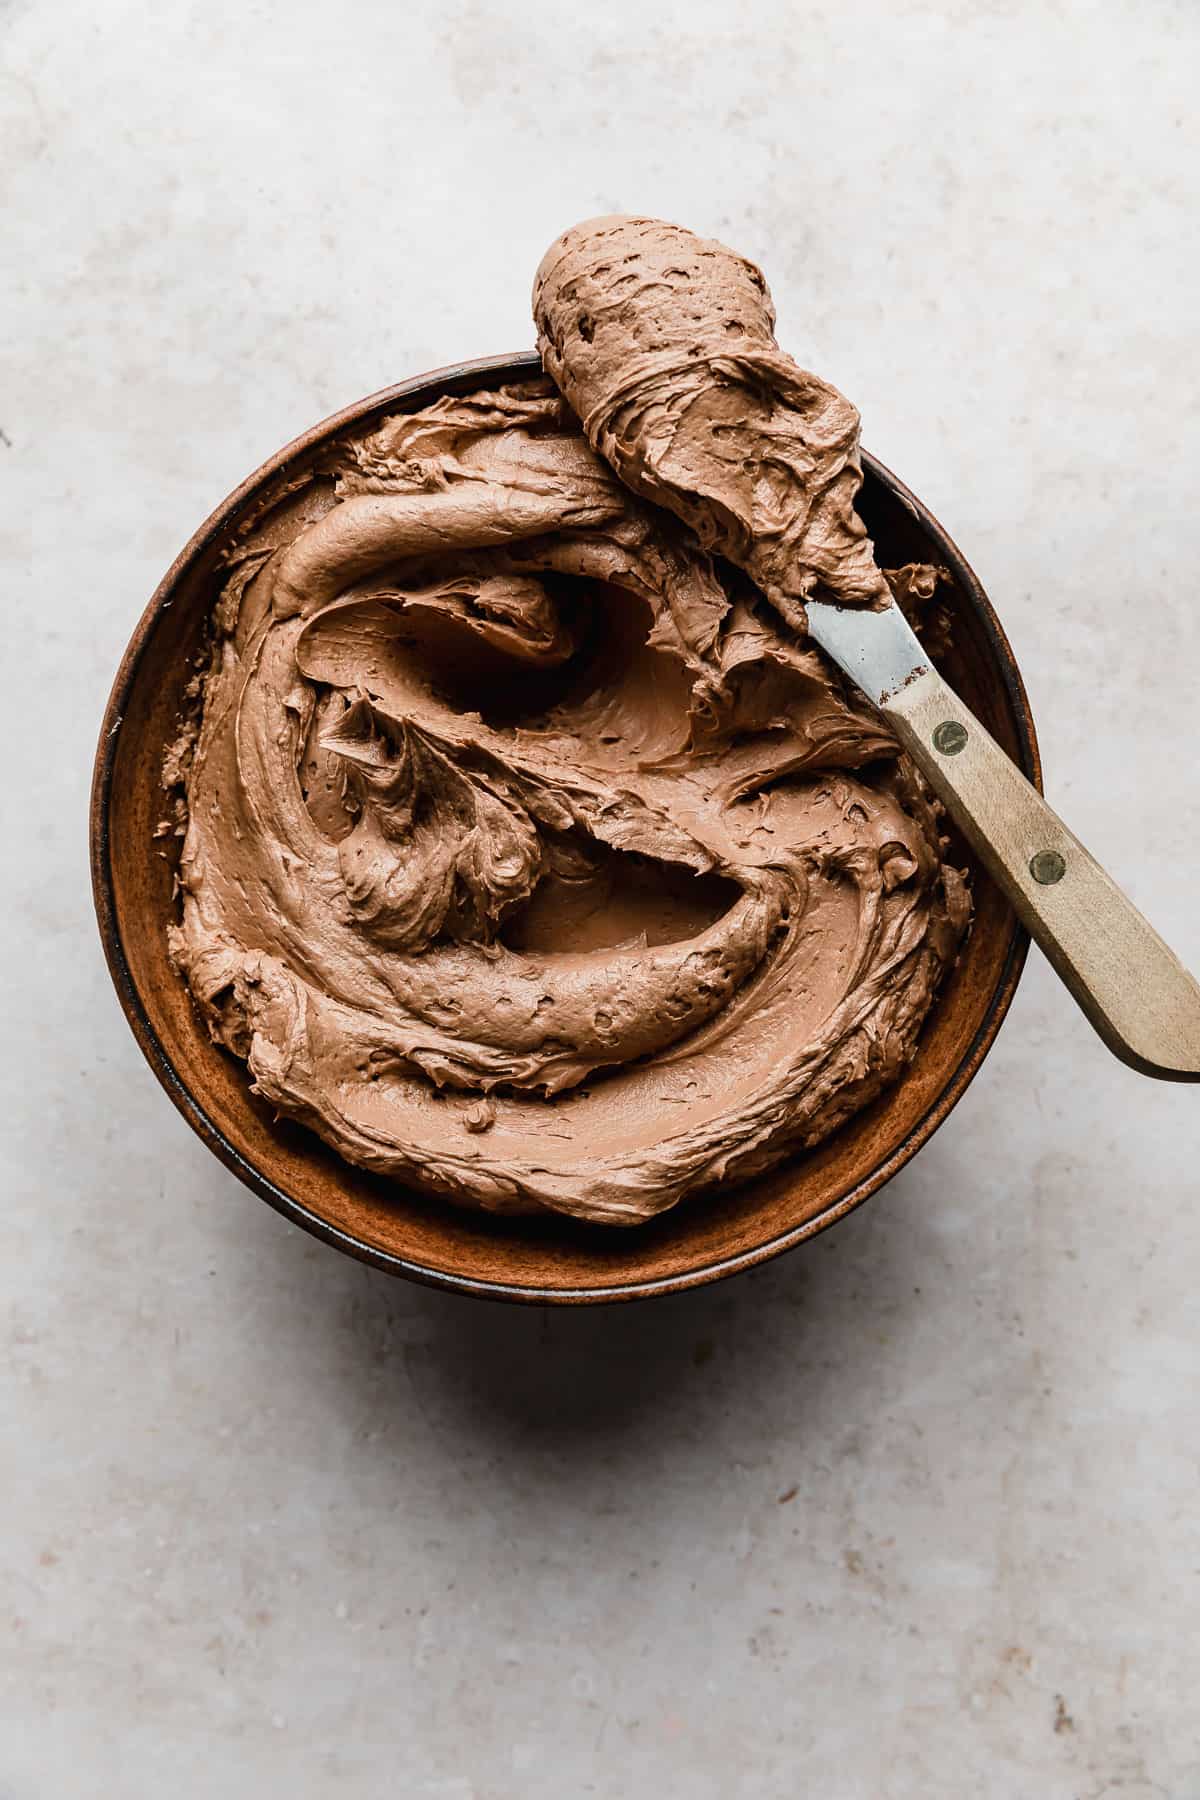 Chocolate Buttercream Frosting Recipe in a brown bowl on a cream textured background.